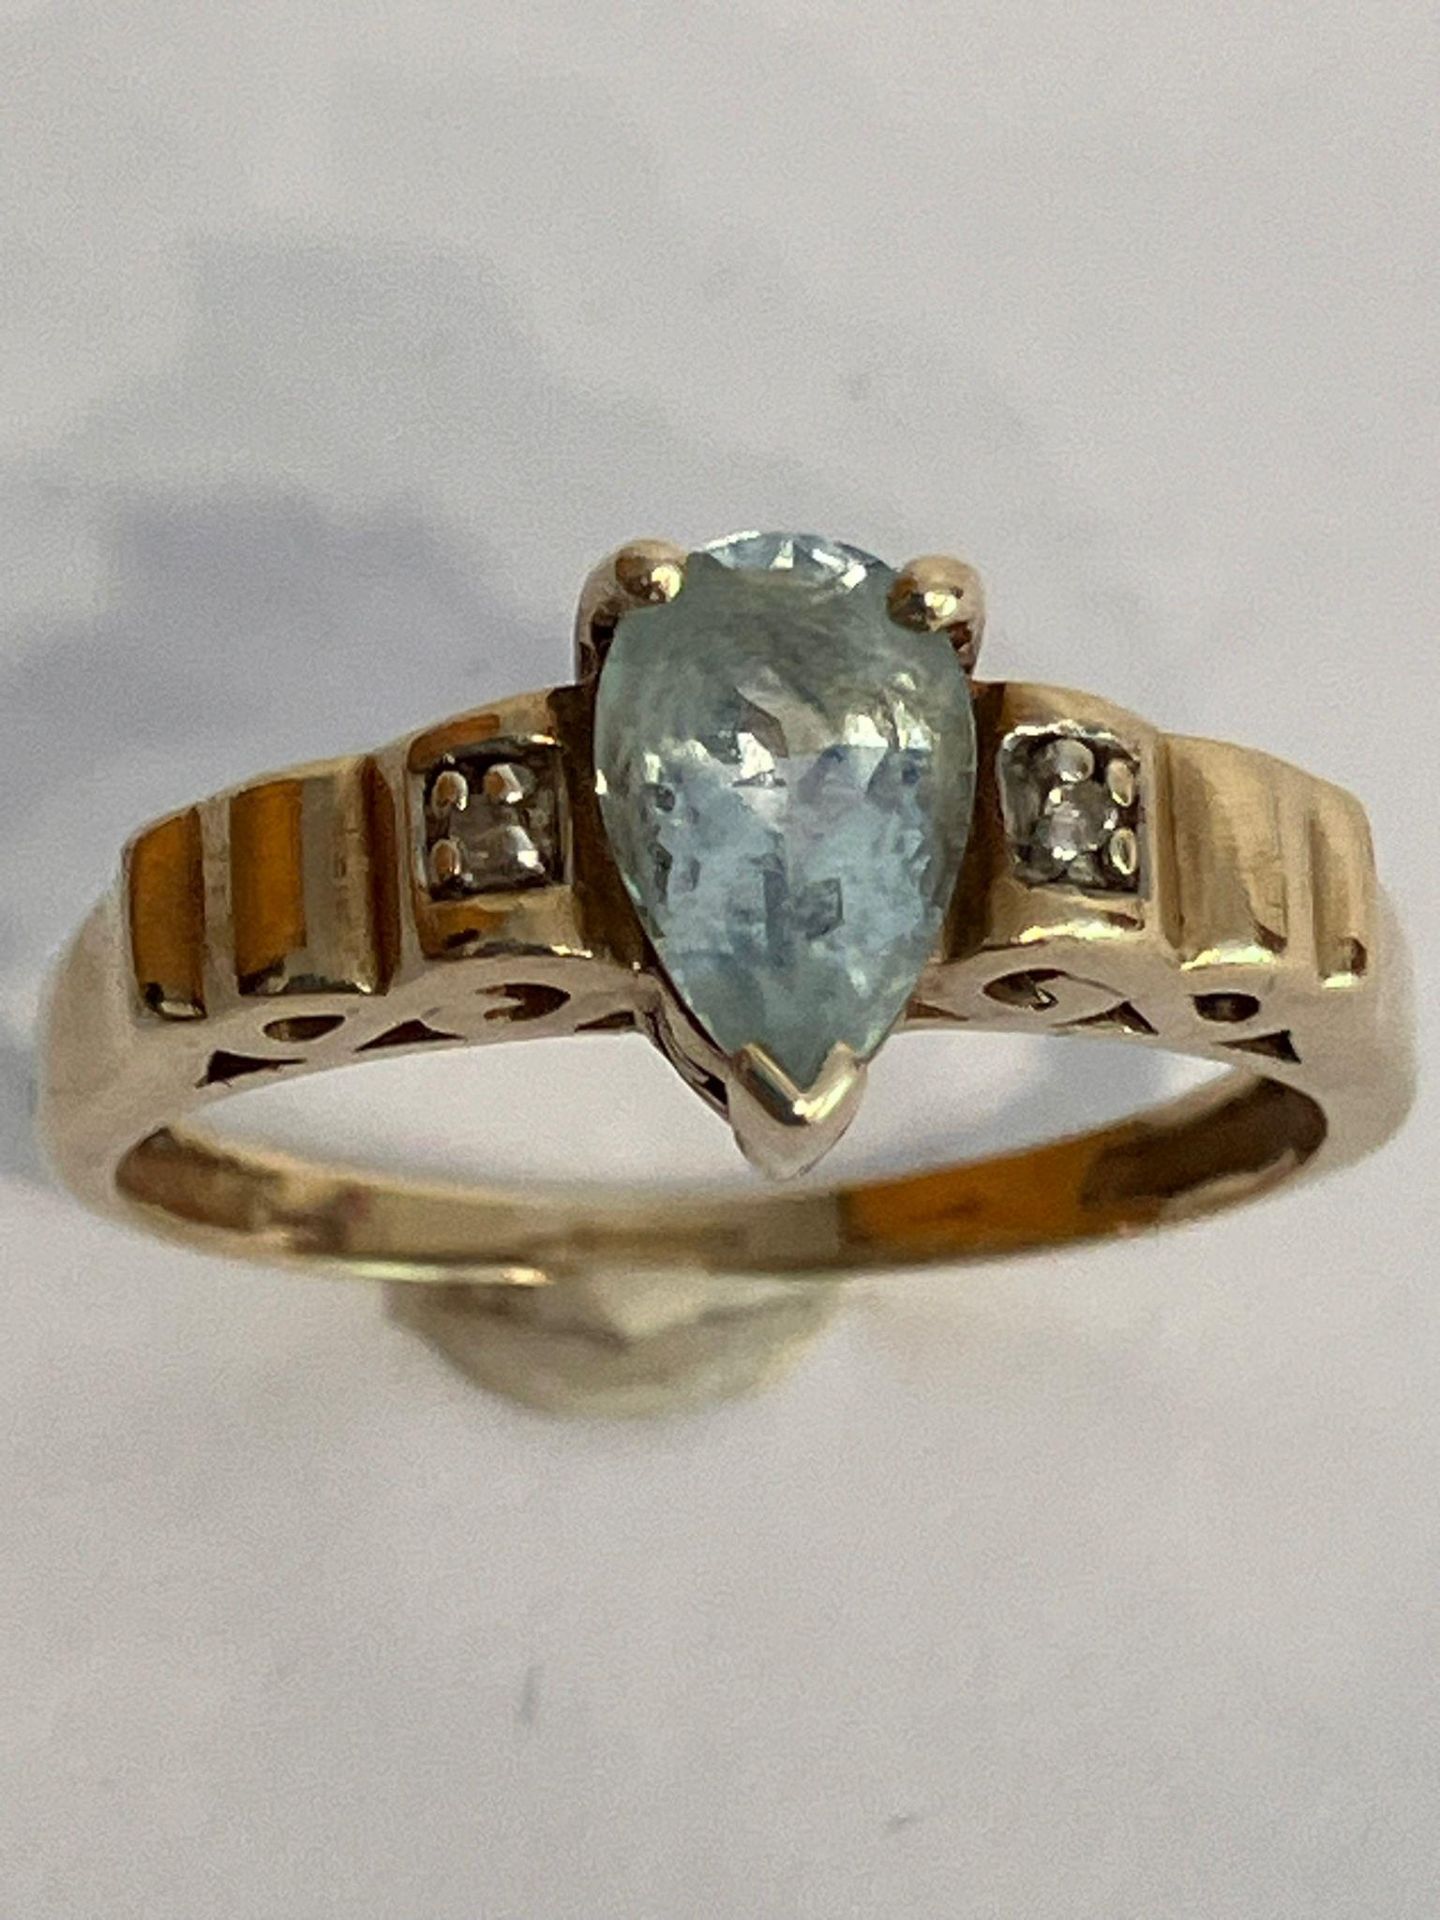 Classic 9 carat GOLD and AQUAMARINE RING. Consisting a Pear Cut AQUAMARINE mounted to top with